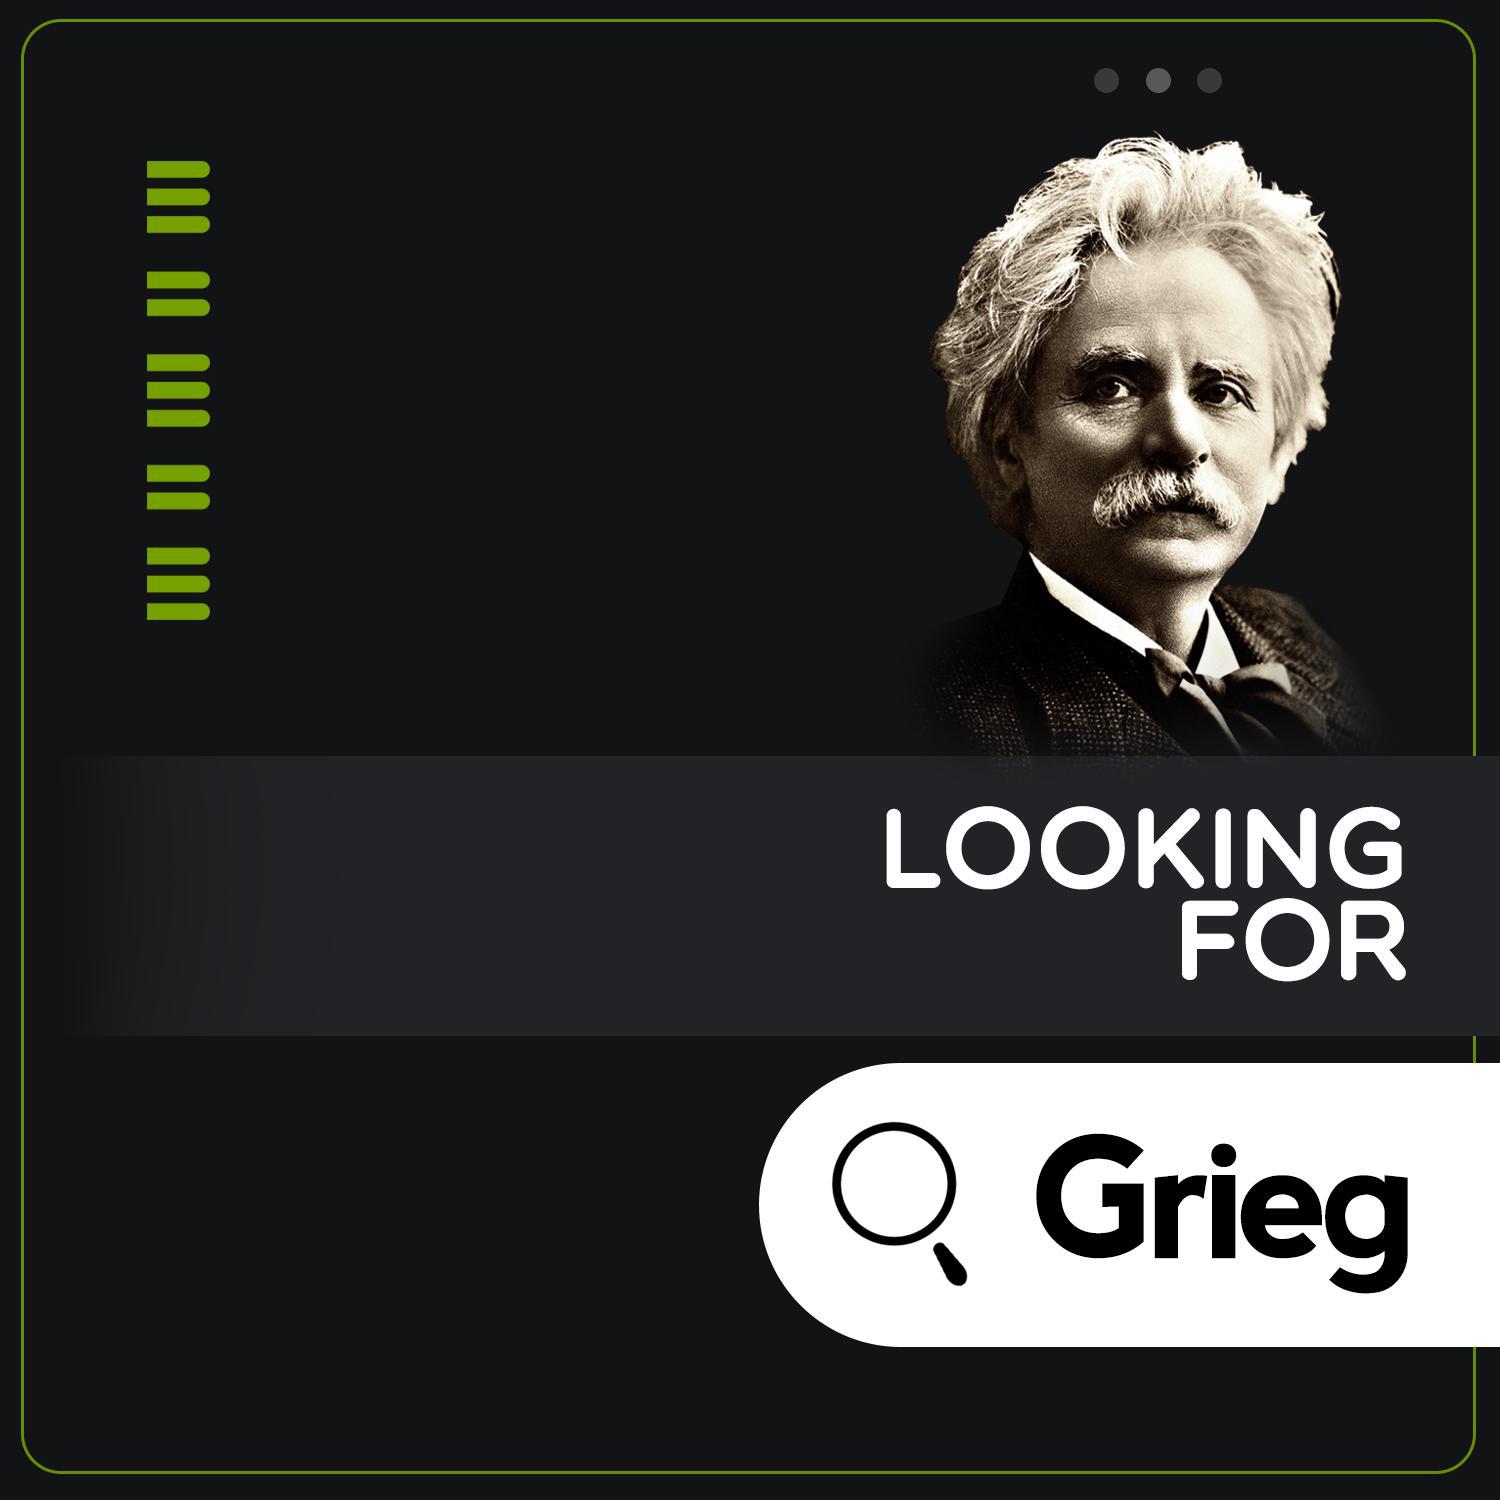 Looking for Grieg